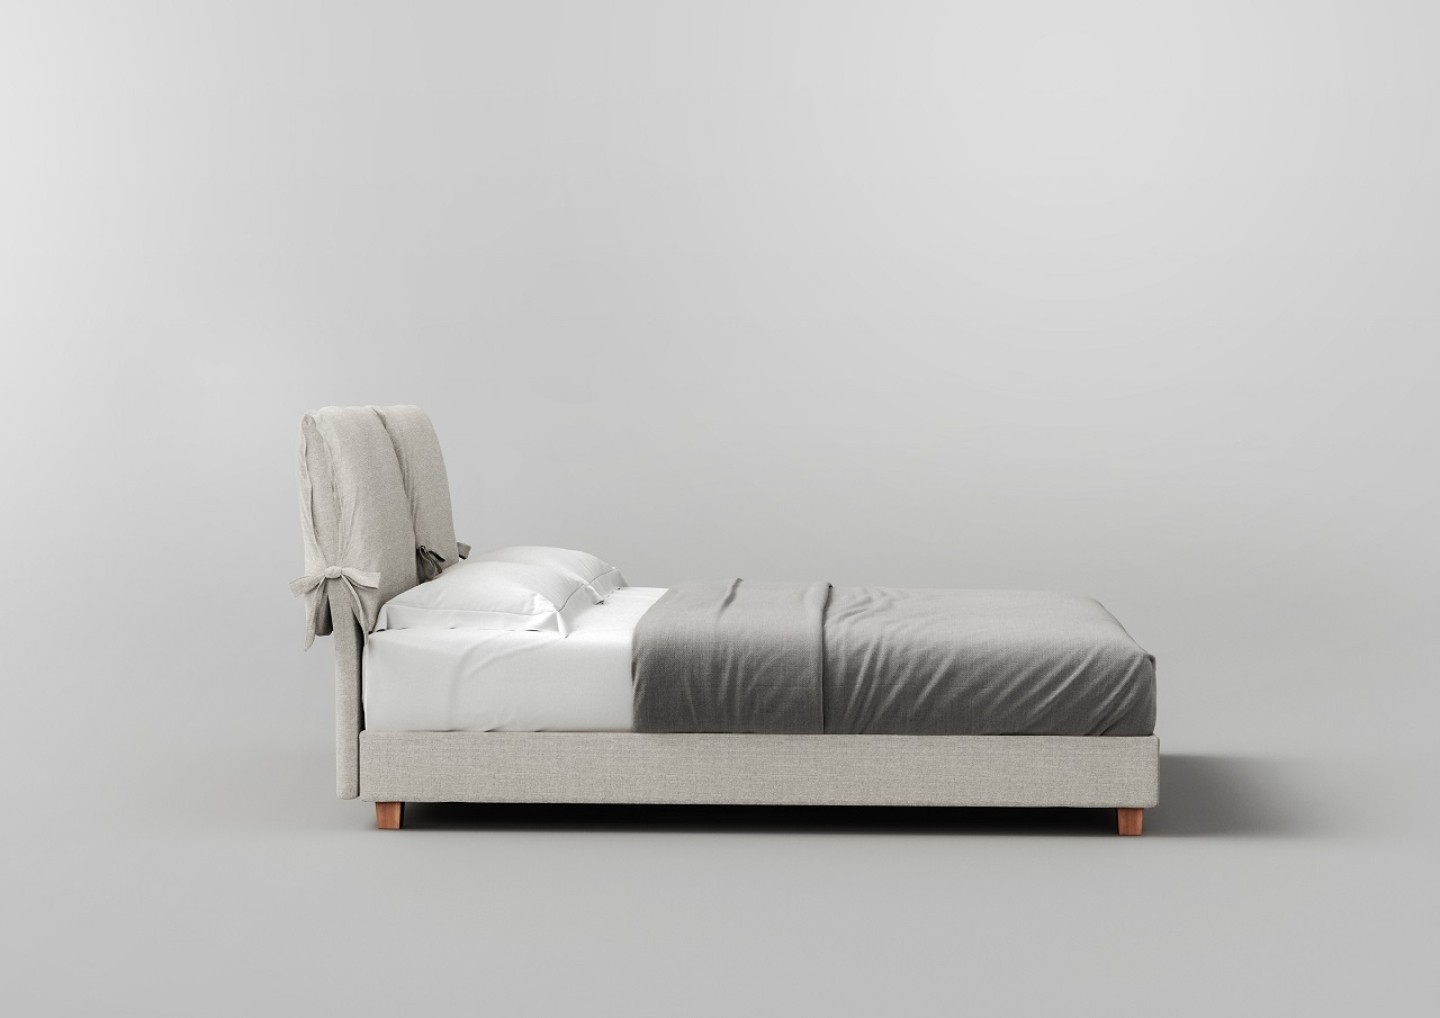 THE SOFT BED by Elite Strom